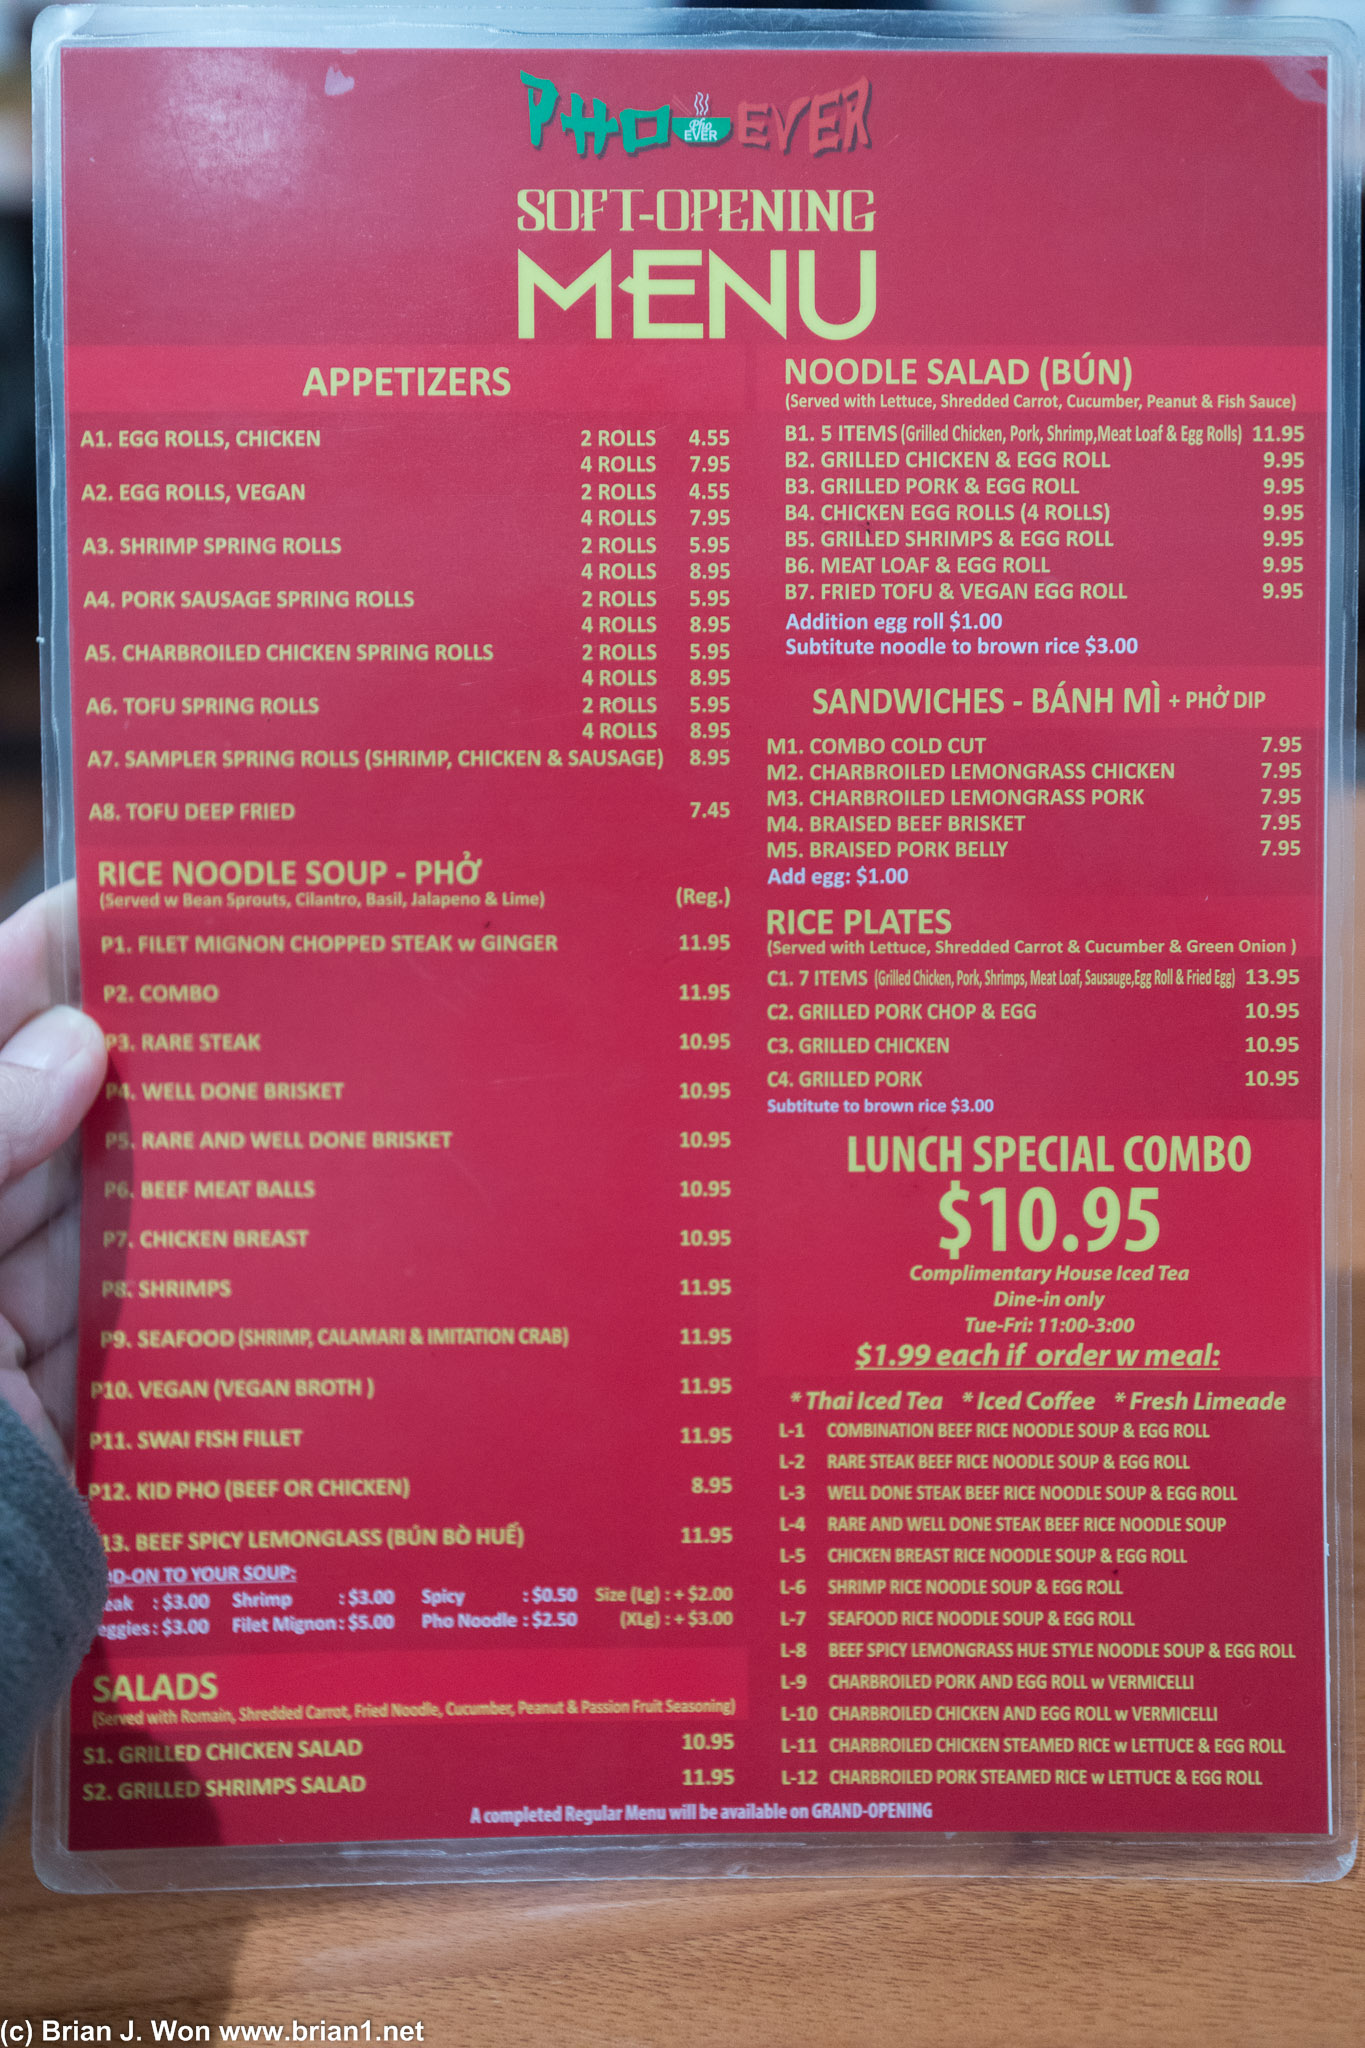 Pretty diverse menu for a pho place that's only soft open.